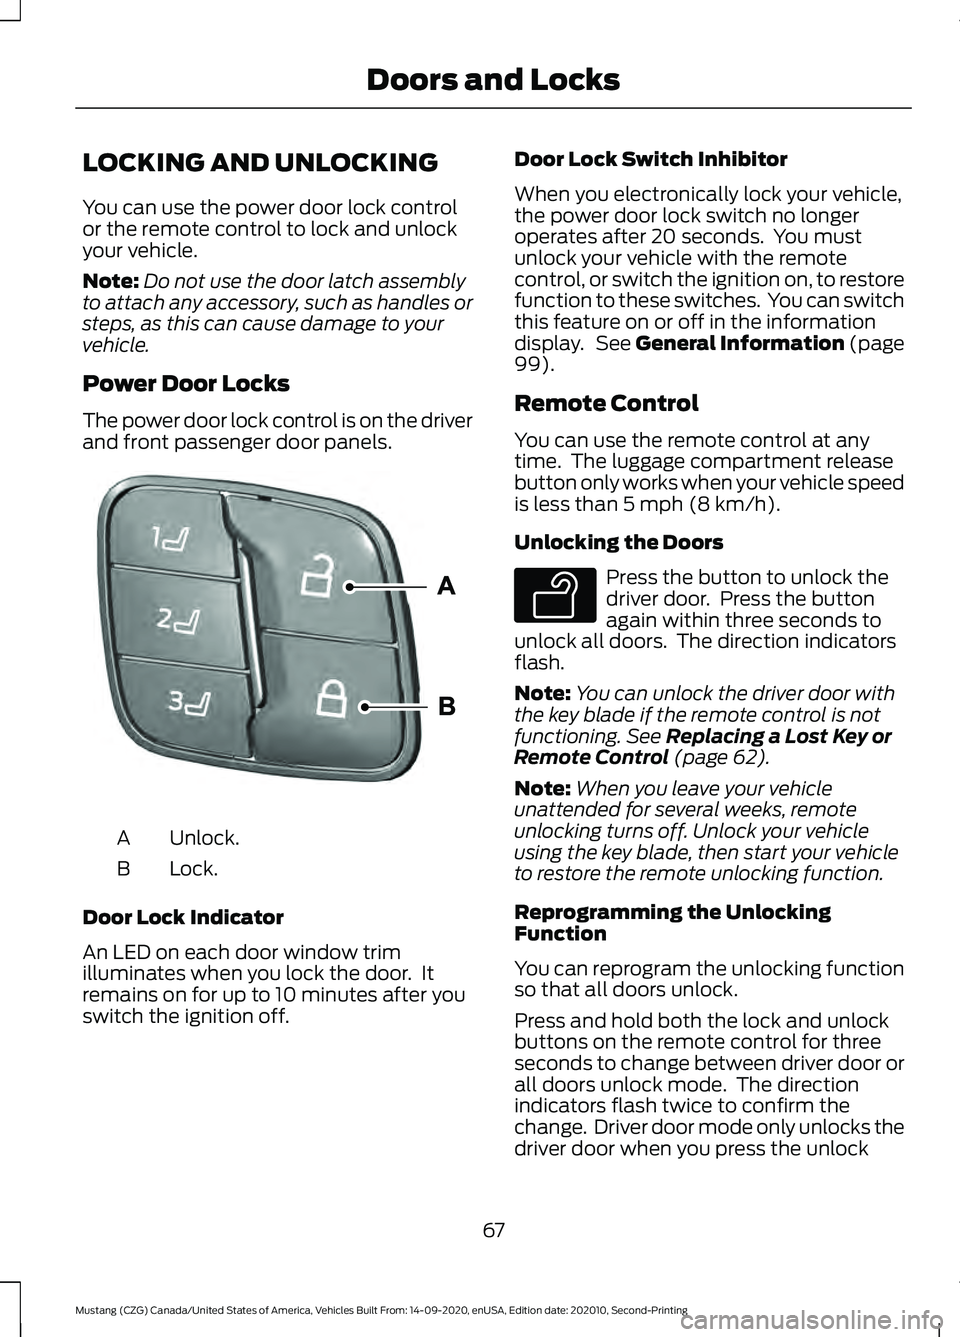 FORD MUSTANG 2021  Owners Manual LOCKING AND UNLOCKING
You can use the power door lock control
or the remote control to lock and unlock
your vehicle.
Note:
Do not use the door latch assembly
to attach any accessory, such as handles o